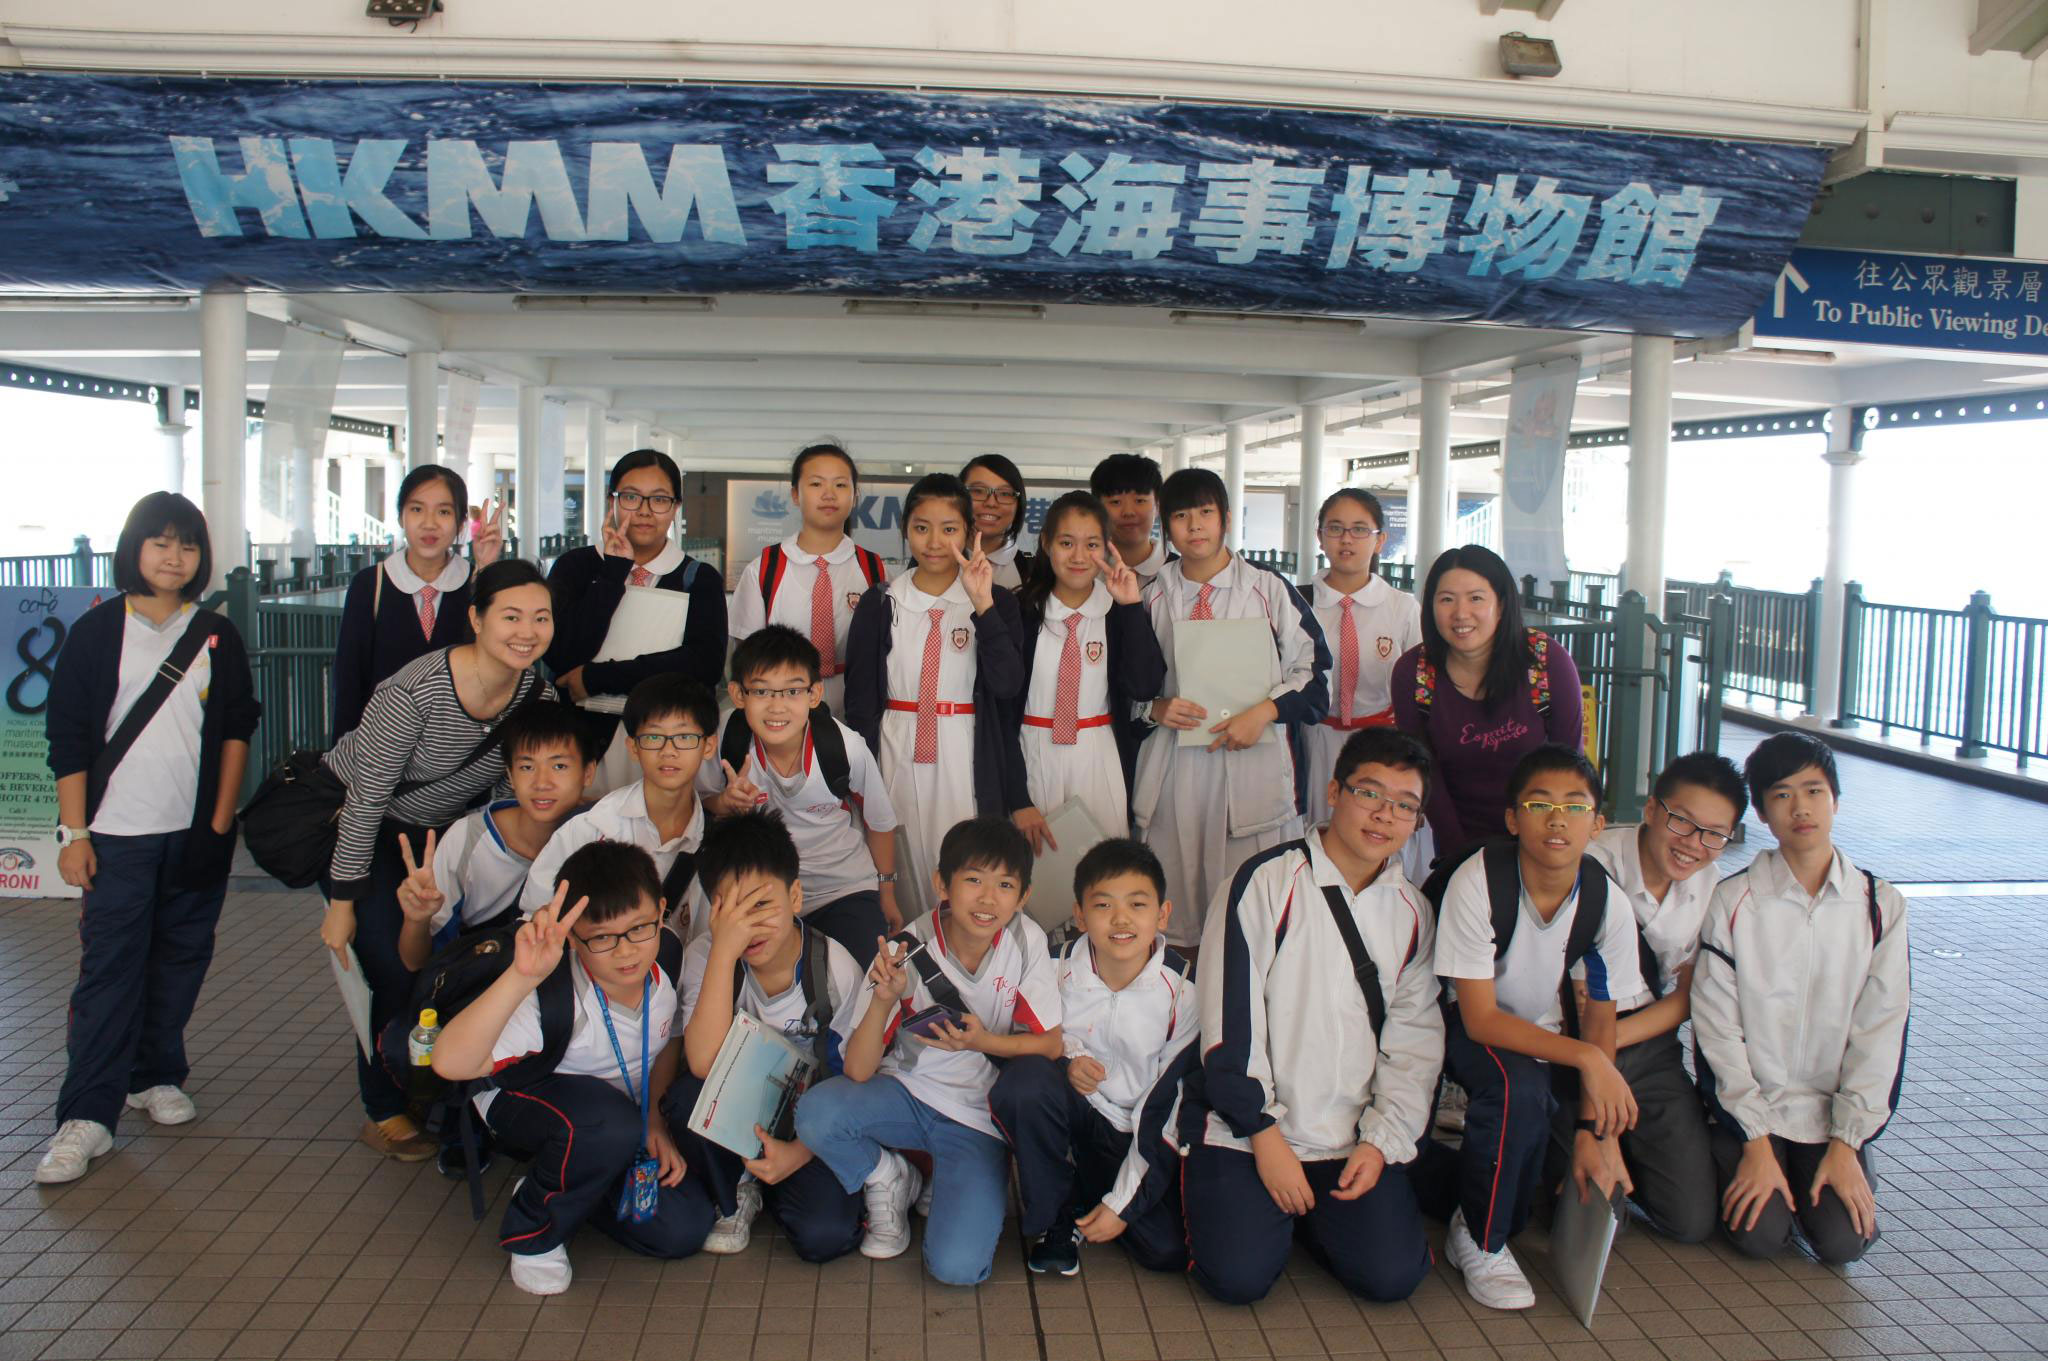 Group photo 1 at the entrance to the HK Maritime Museum